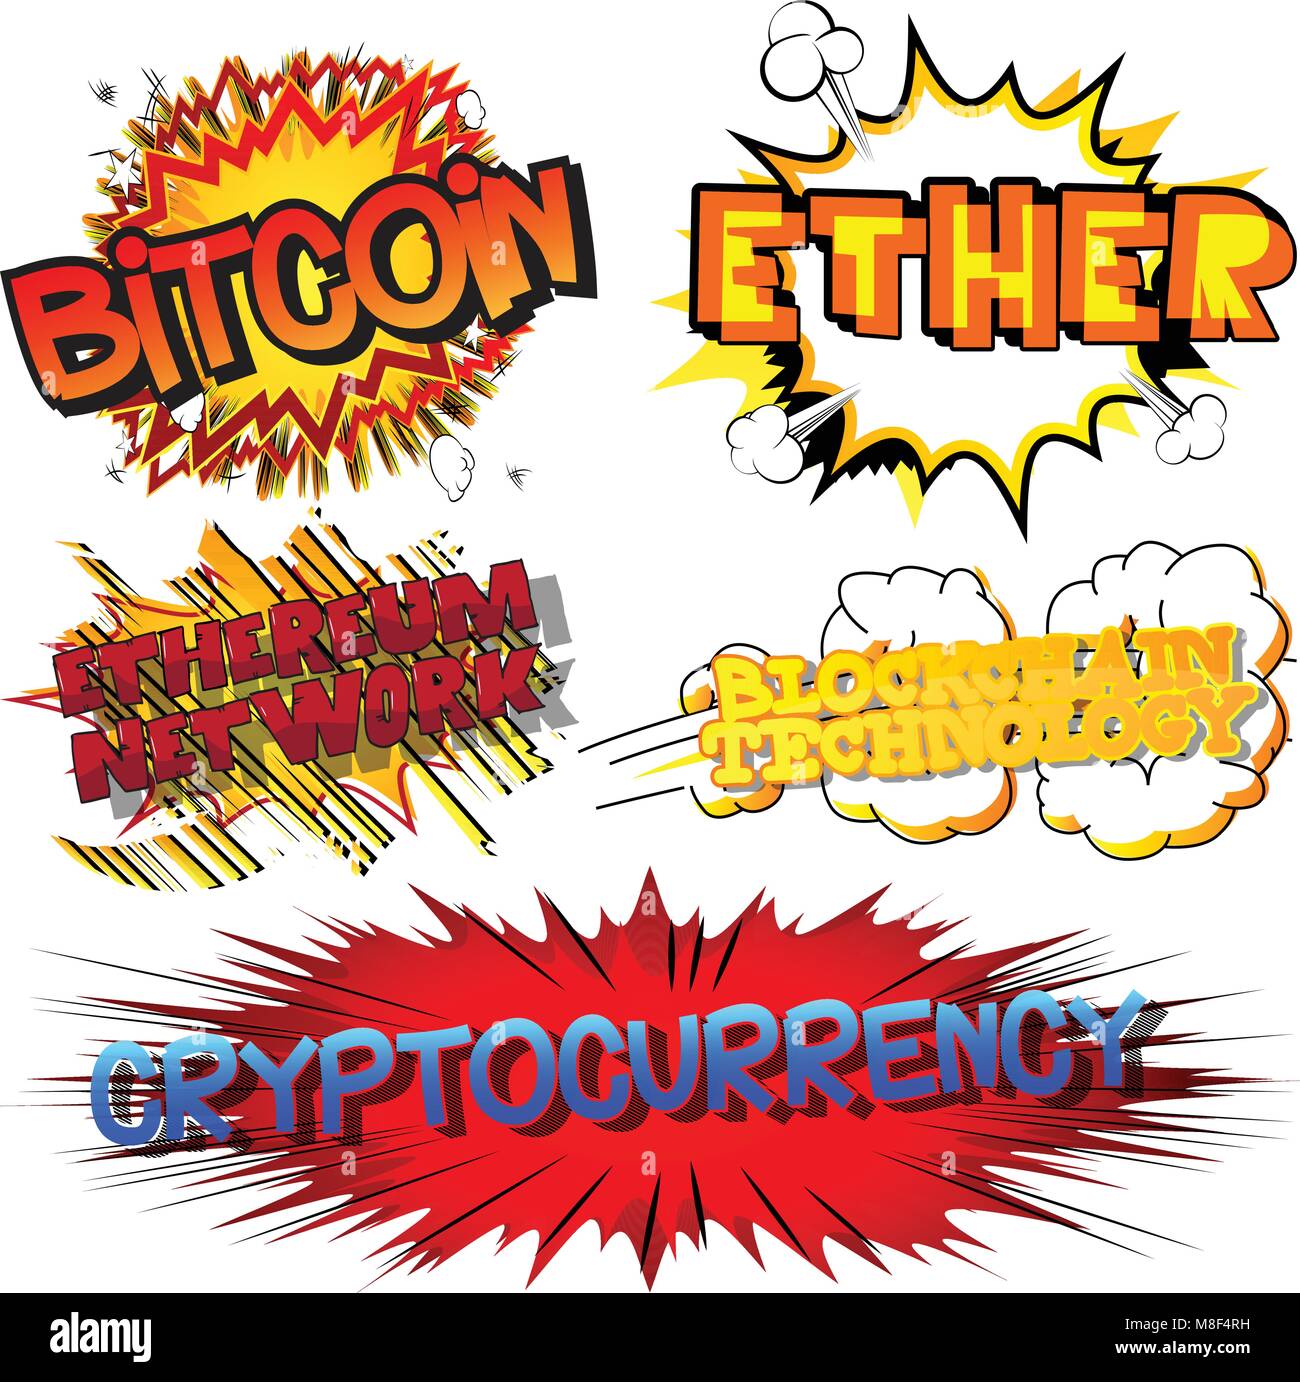 crypto related words